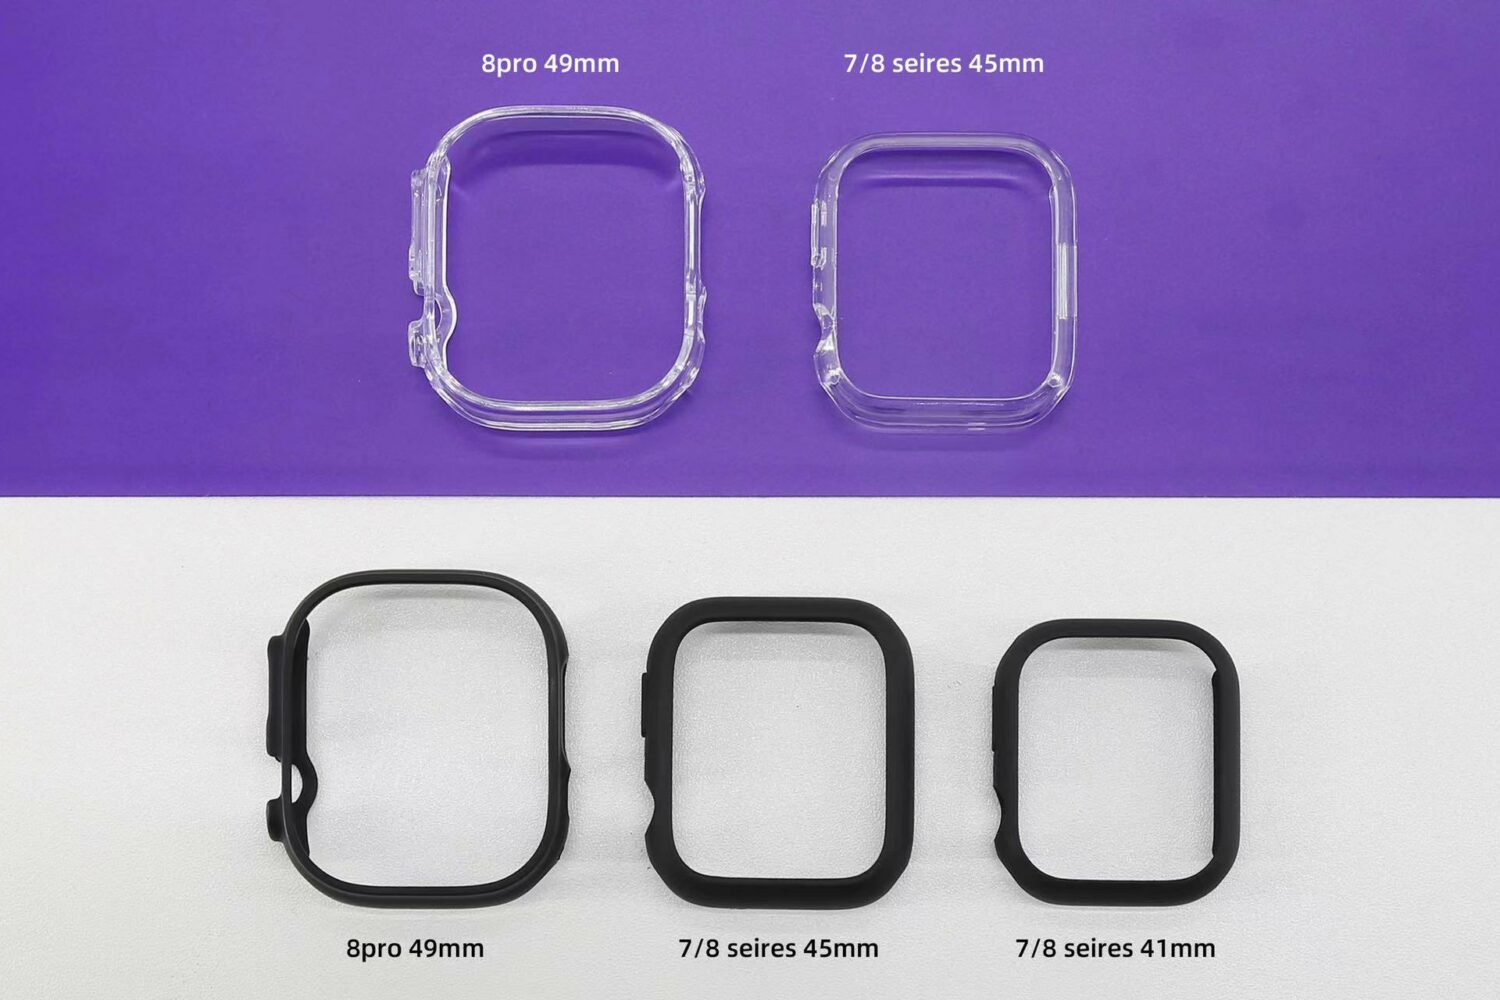 Side-by-side images of protective cases for Apple Watch Pro, Series 8 and Series 7 illustration size differences